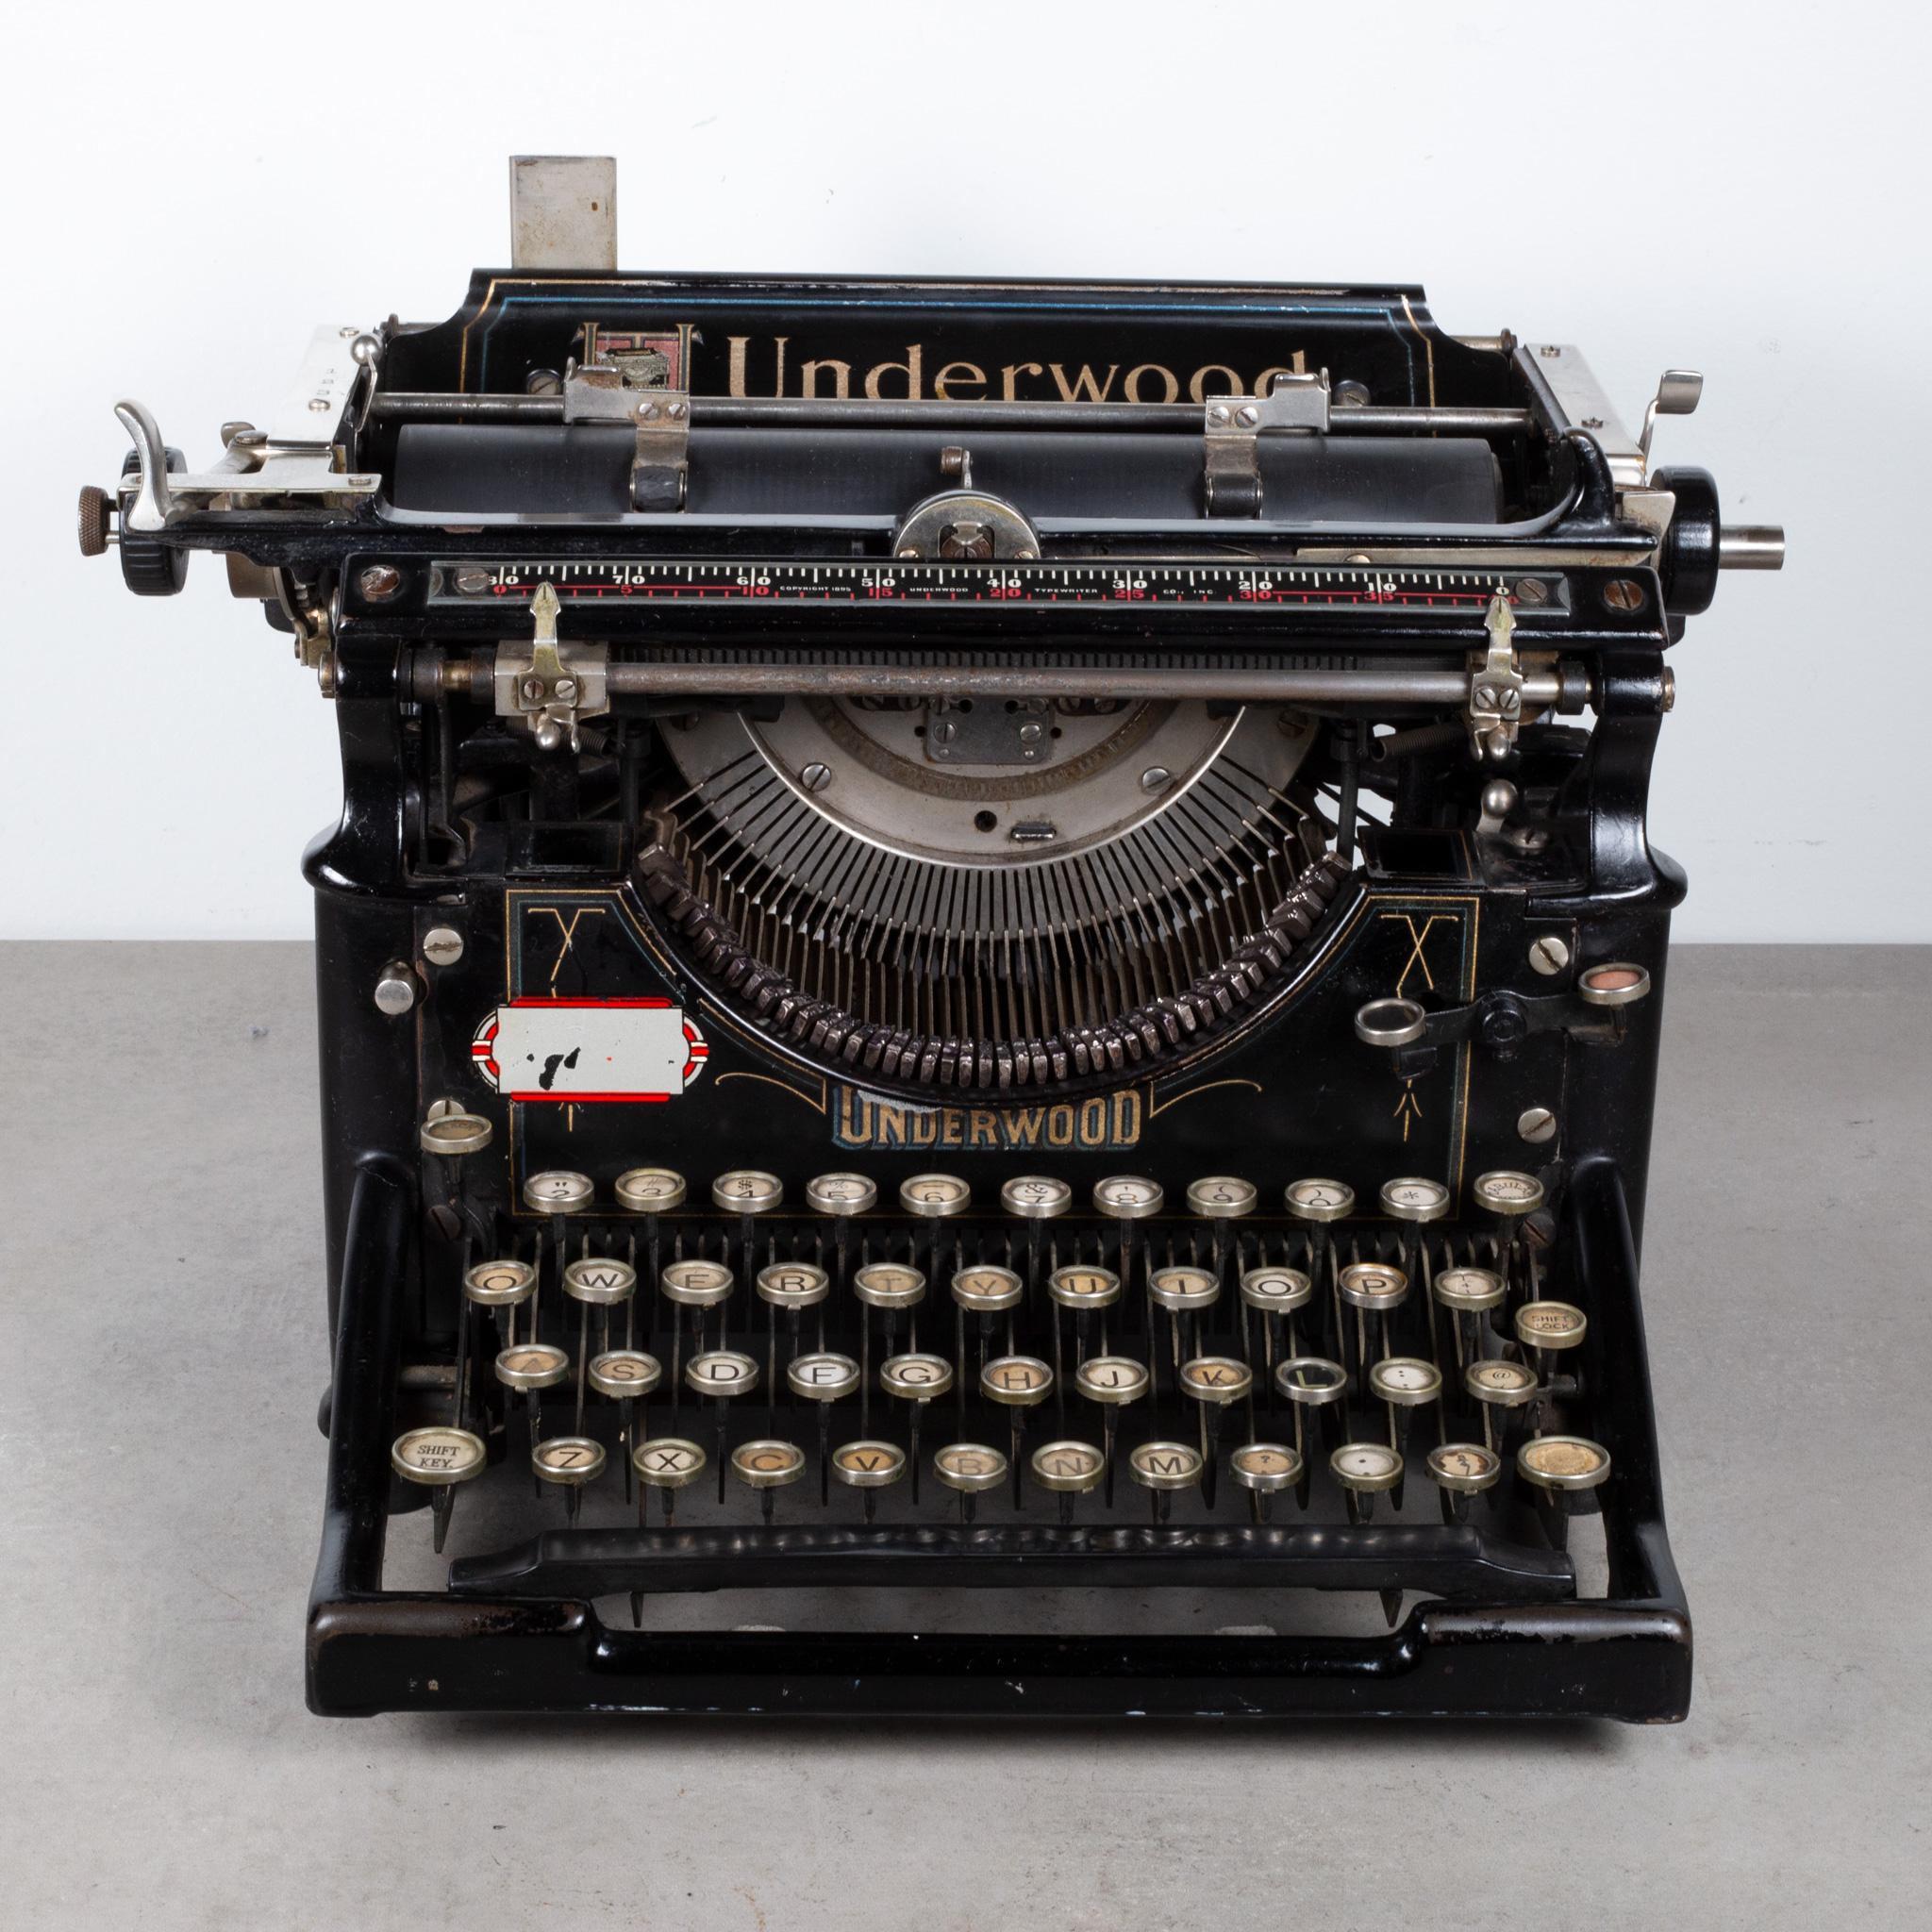 ABOUT

An original Underwood typewriter No.5 with a 15 inch carriage and an open-frame design. The typewriter works well and functions properly. Ribbon is good. The serial number is #732307 stamped in the inside. Original gold lettering. The keys